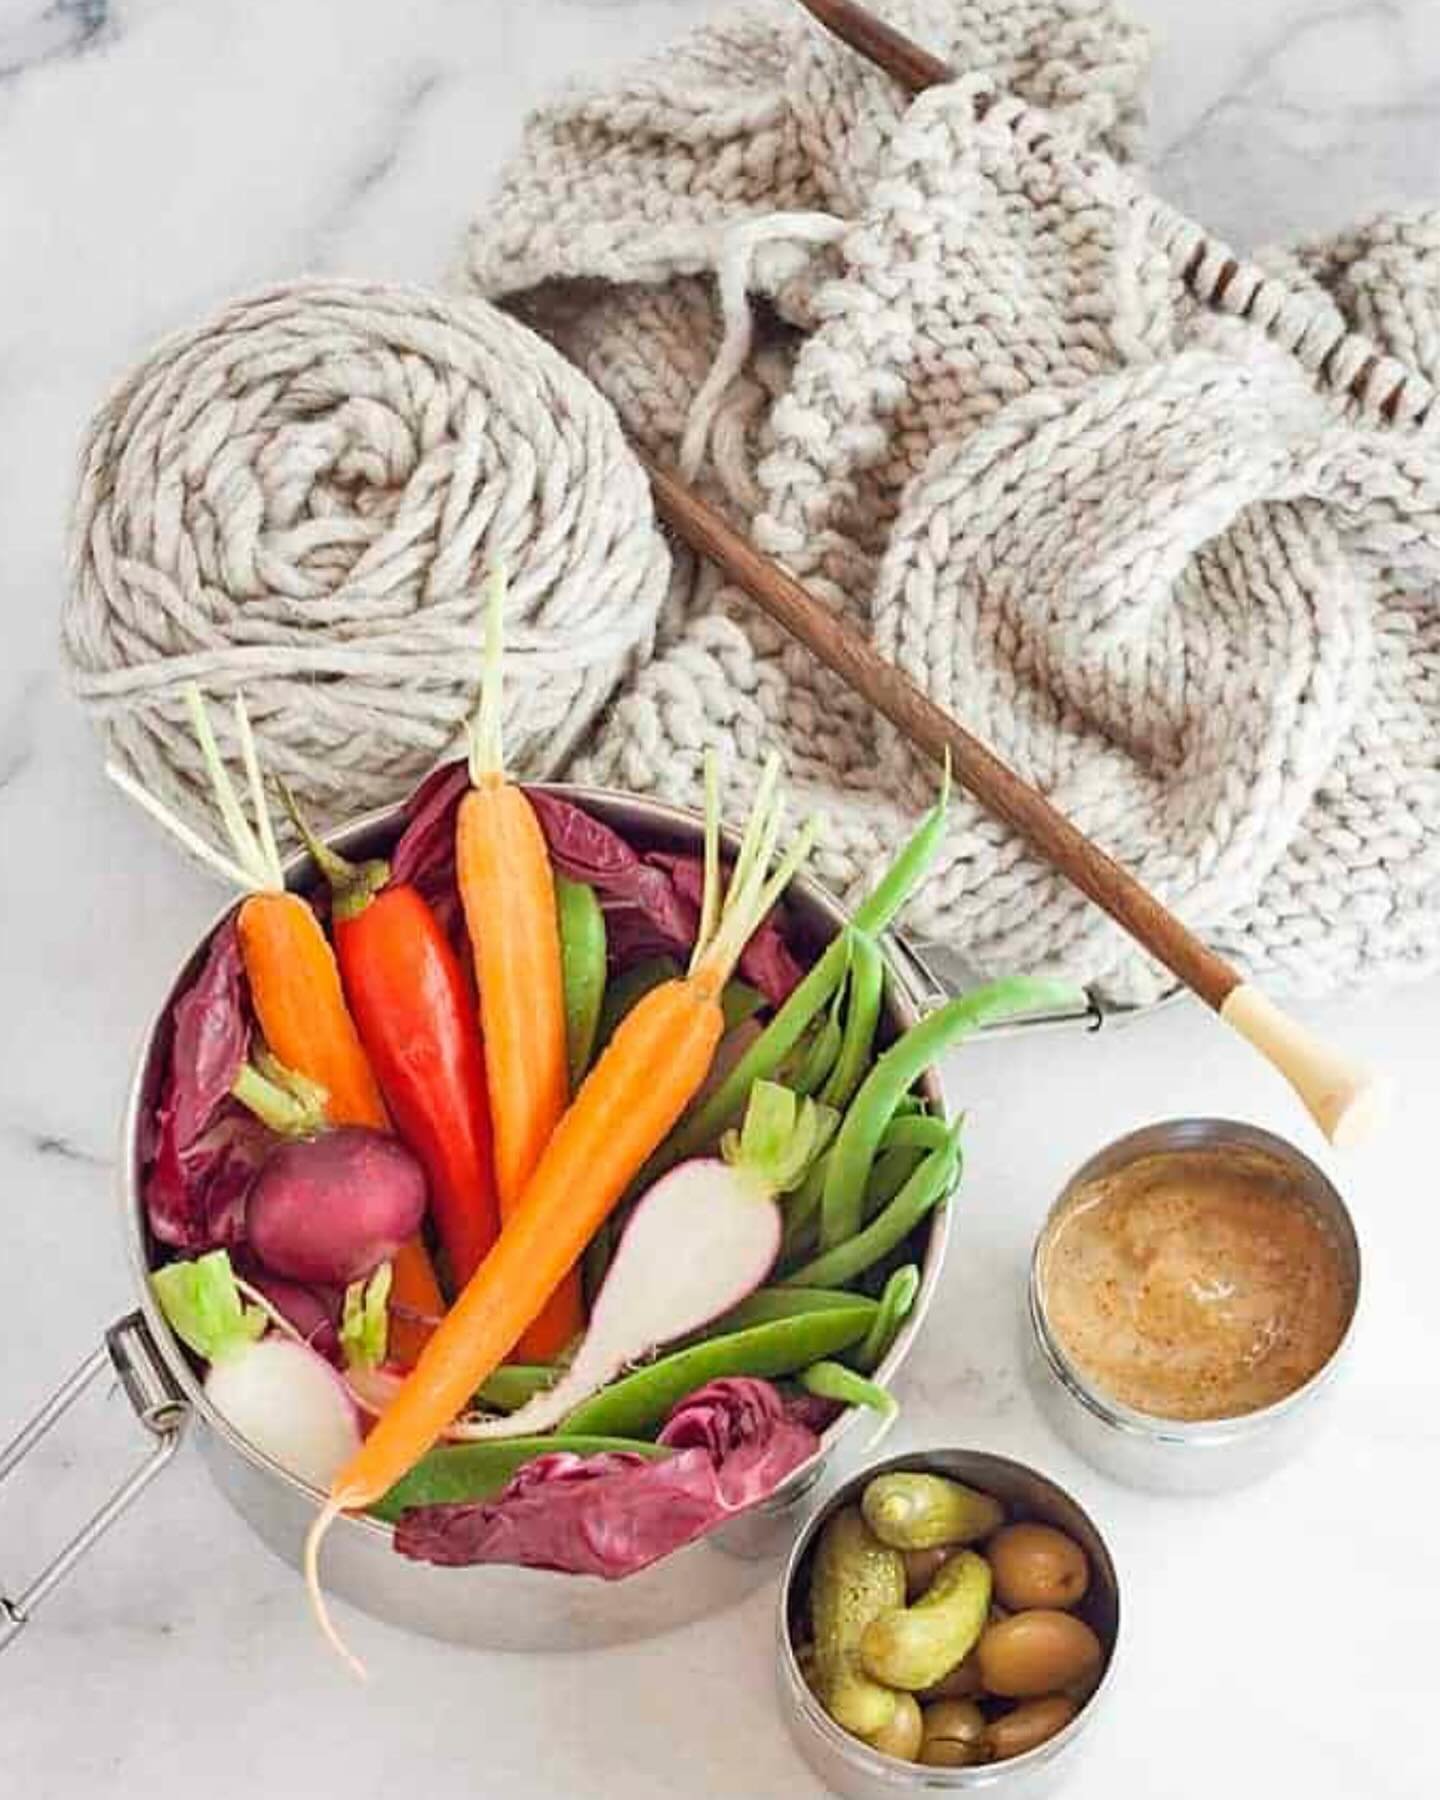 BEAUTIFUL FOOD BY DESIGN | Eat your veggies! Almond-Sesame Dip is one recipe to help meet the challenge. A simple Bijouxs Basics that is first a savory dip for raw veggies that travels well for lunches, then easily transforms into salad dressing and 